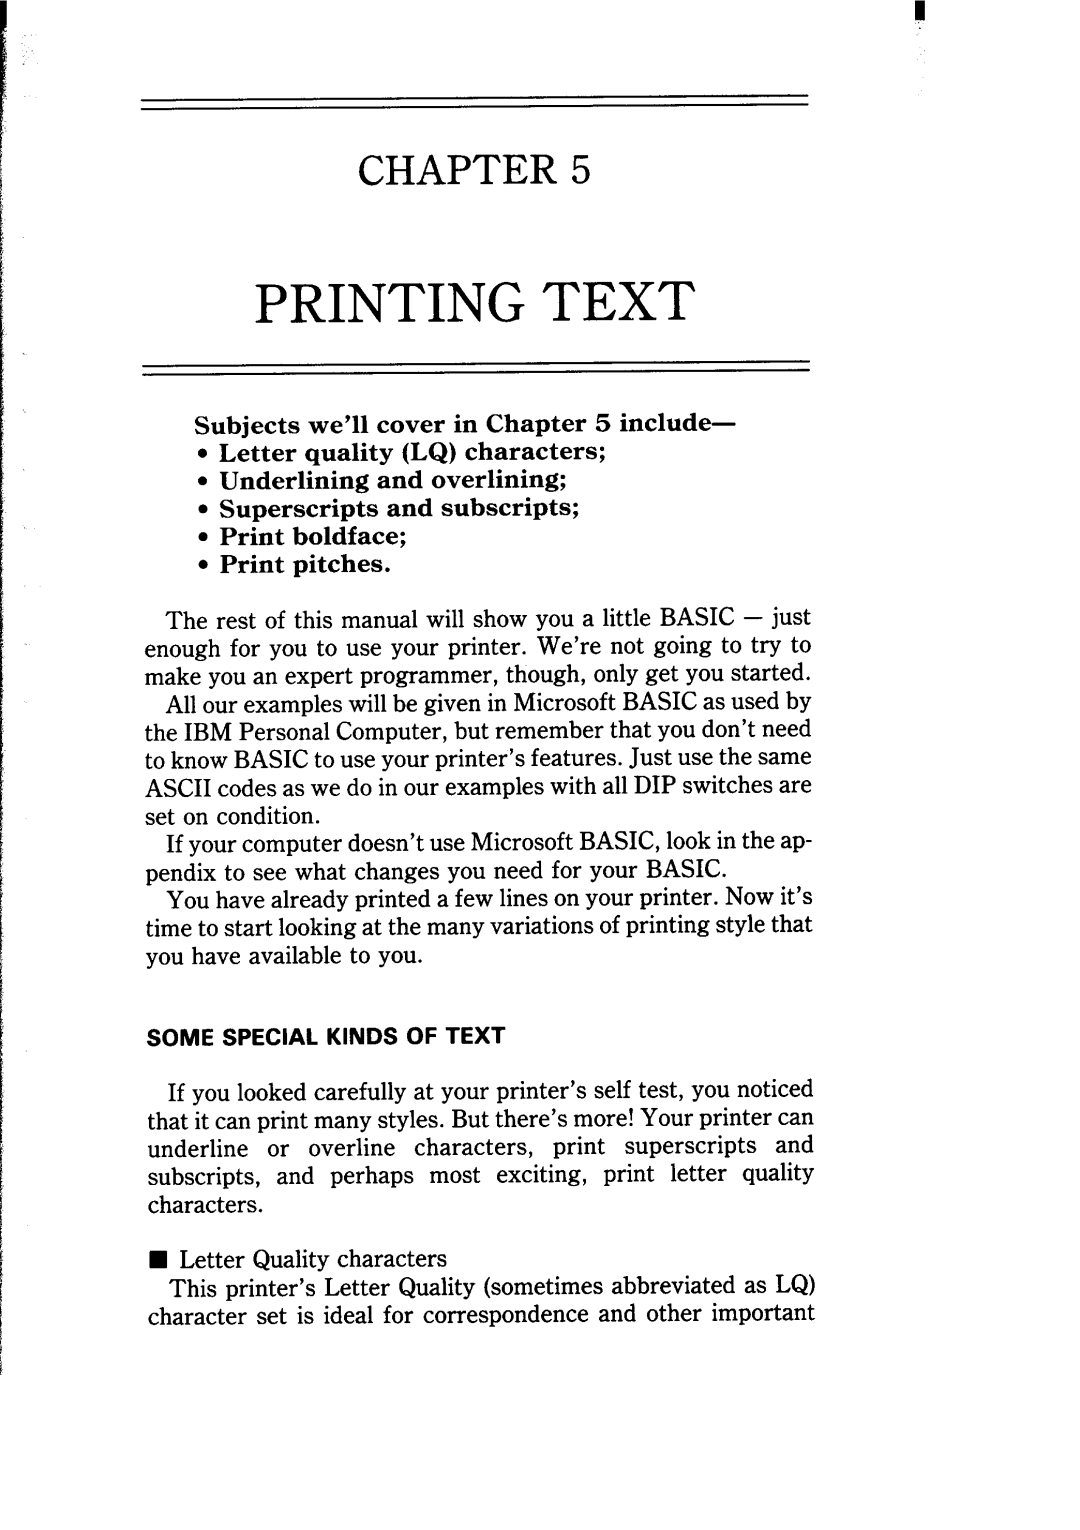 Star Micronics NB-15 user manual Printing Text, Chapter, Subjects we’ll cover in include 